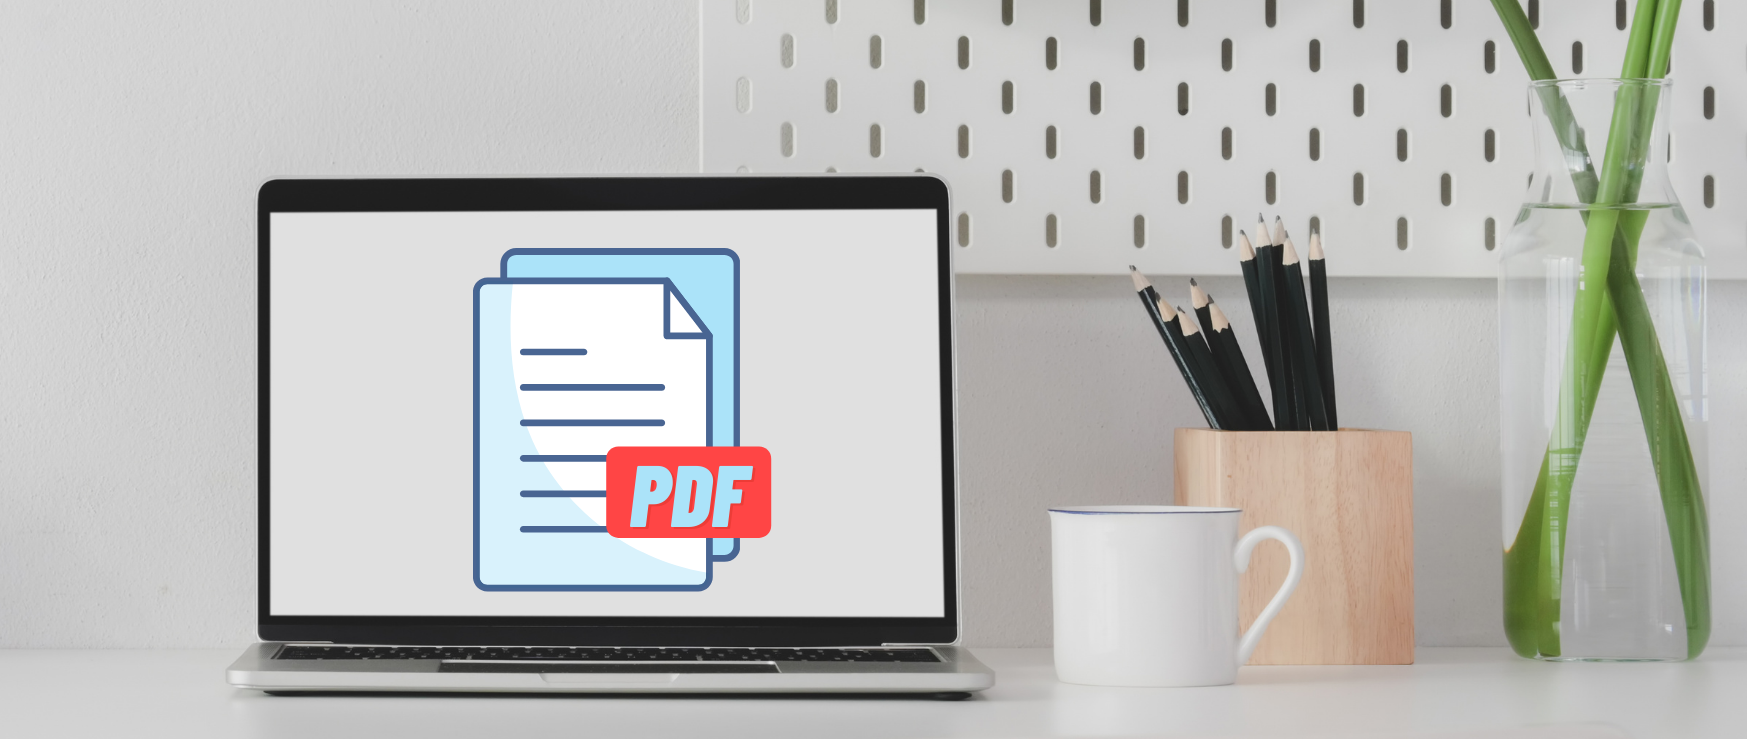 Guide to Embed Fonts in PDF